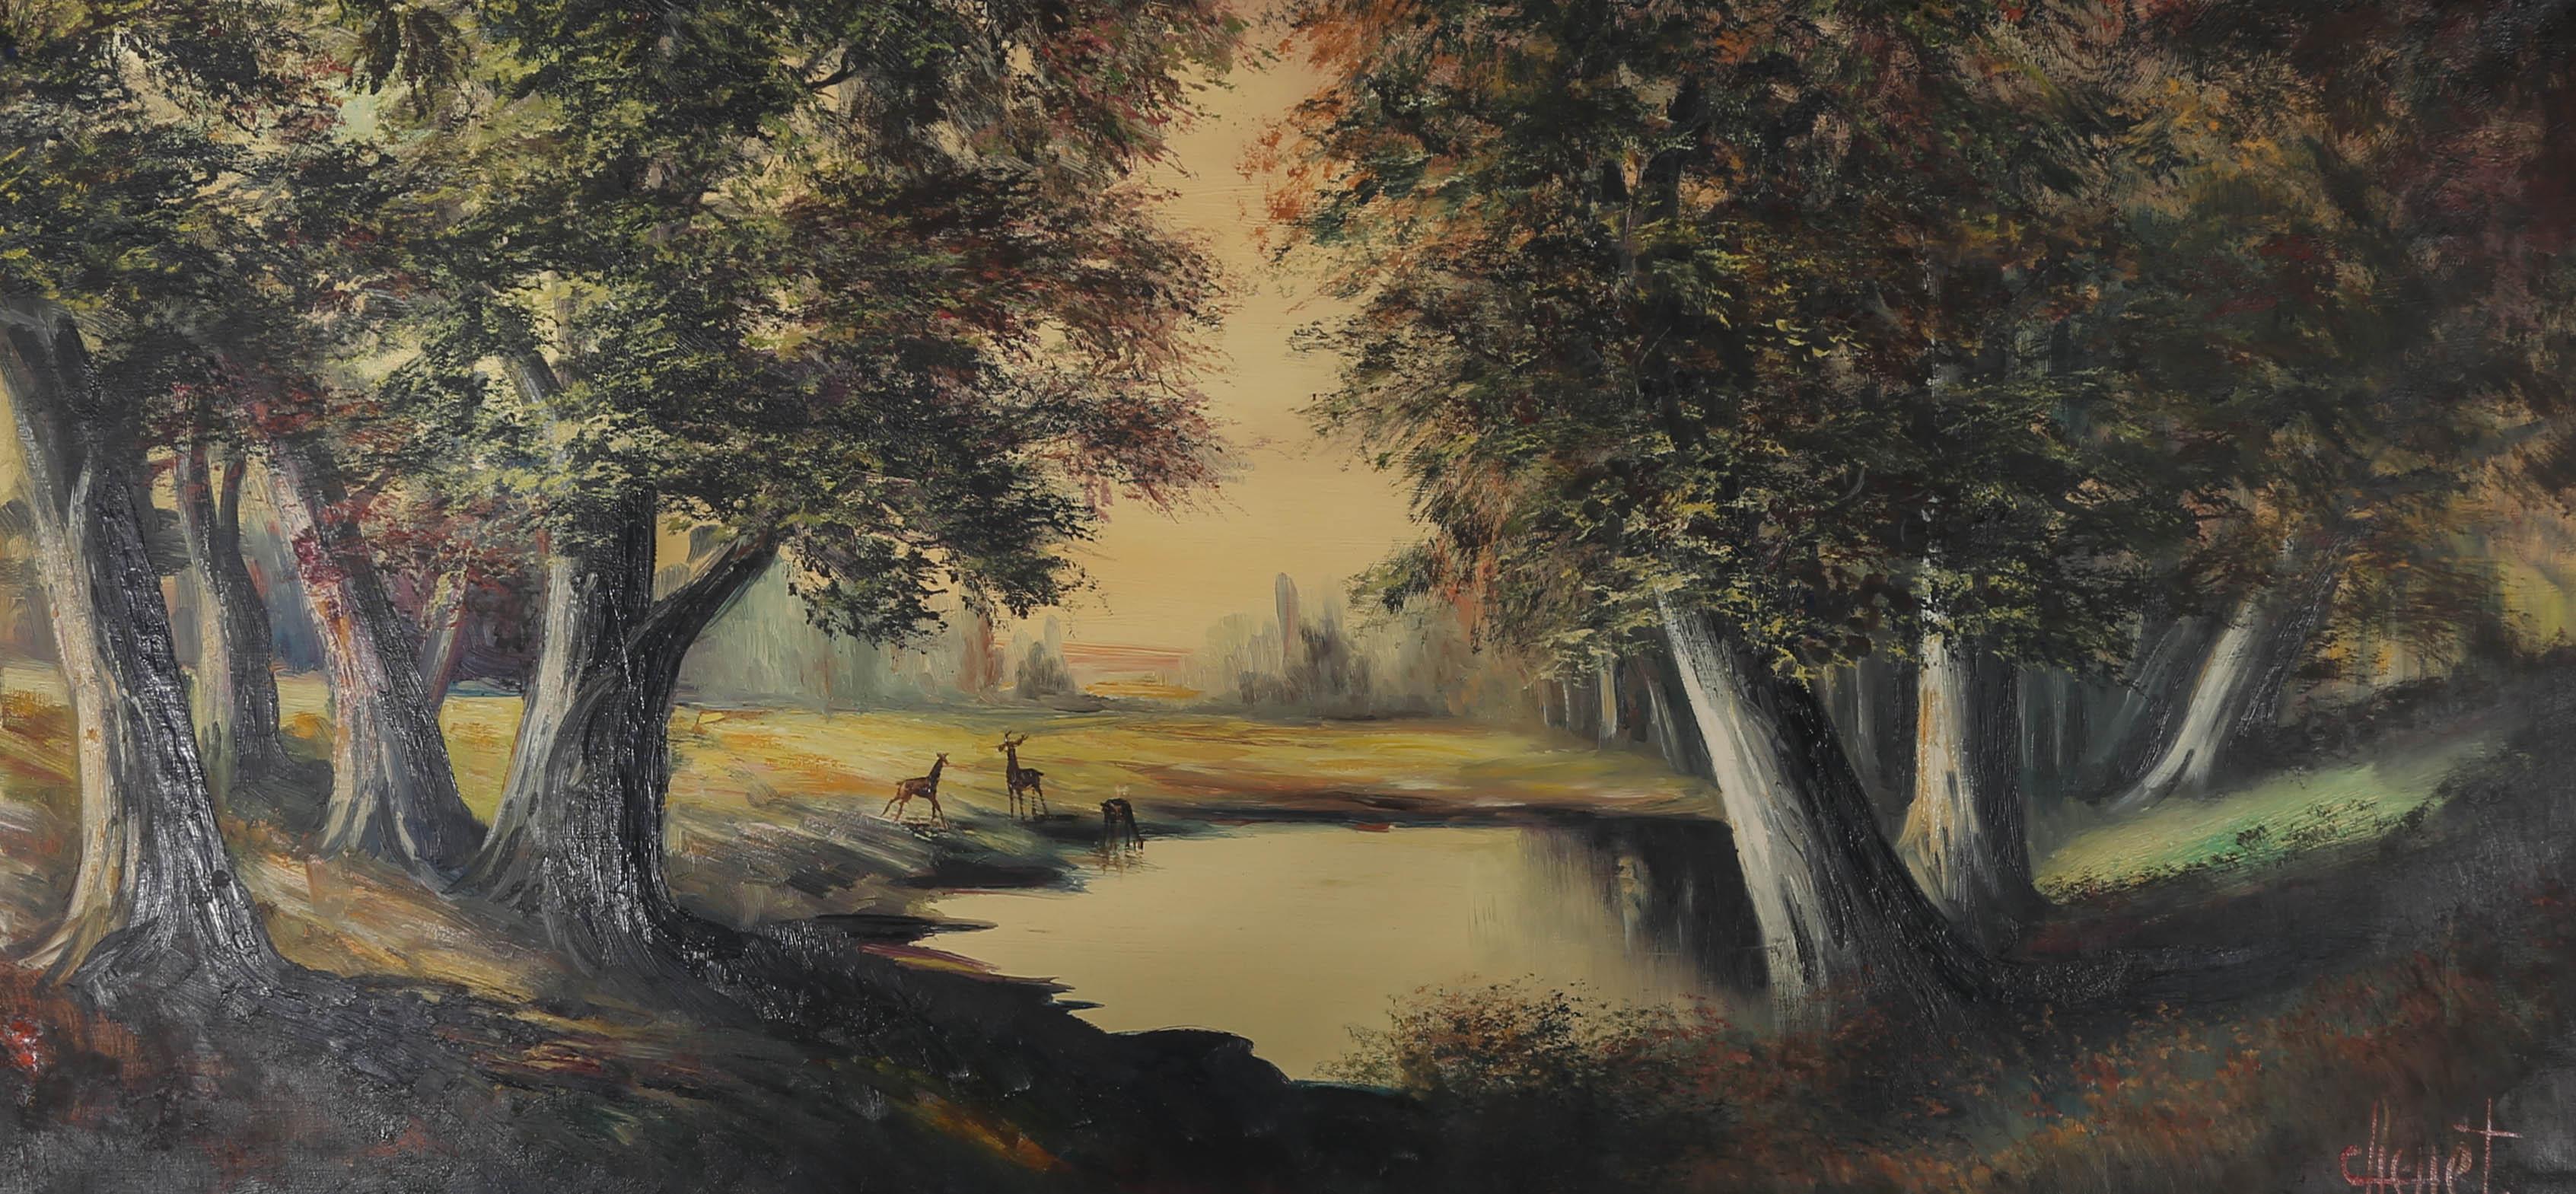 A colourful serene landscape of impressive size, showing a beautiful woodland clearing with deer drinking from a calm pool under a blushing sunset. The artist has signed to the lower right corner and the painting has been presented in a 20th Century